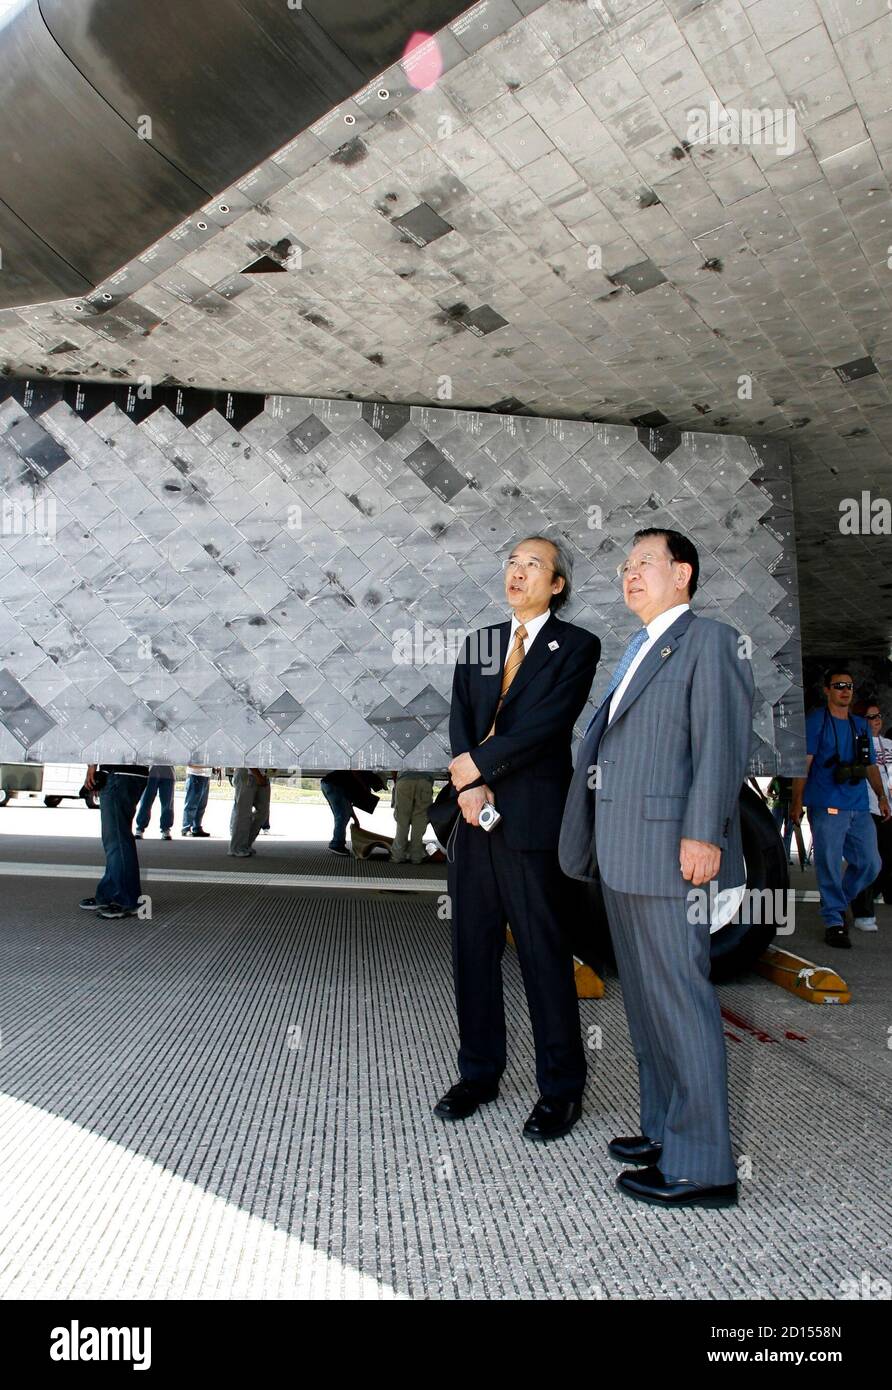 JAXA vice president Kaoru Mamiya (R) and Director of JAXA Manned Spaceflight Yuichi Yamaura stand beneath a wing on the space shuttle Discovery after it landed at the Kennedy Space Center in Cape Canaveral, Florida June 14, 2008. Japanese astronaut Akihiko Hoshide was onboard the spacecraft for the mission to the International Space Station.    REUTERS/Pierre DuCharme (UNITED STATES) Stock Photo